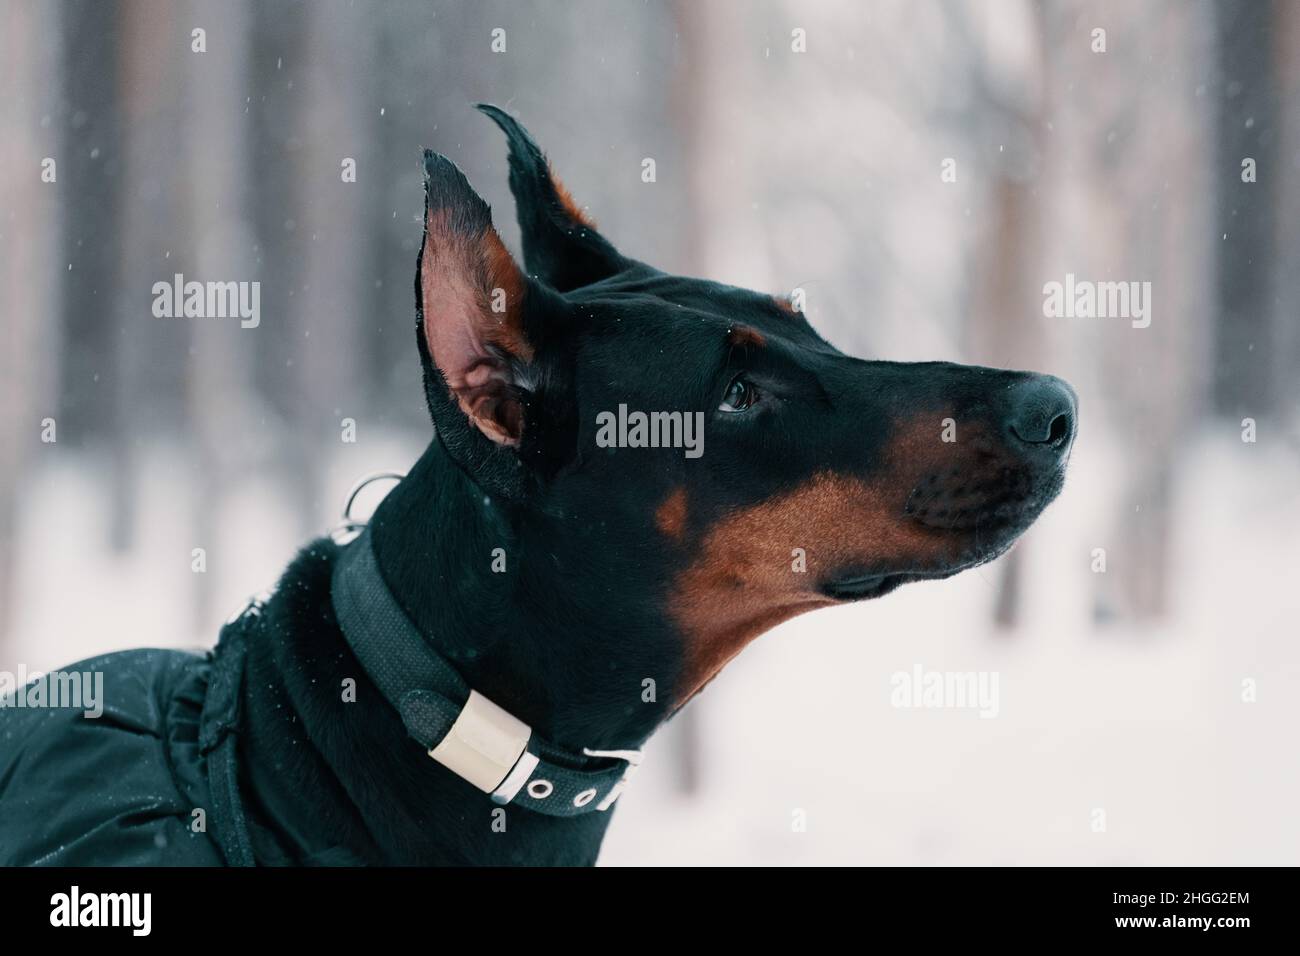 Doberman dog is in outdoors, close-up portrait Stock Photo